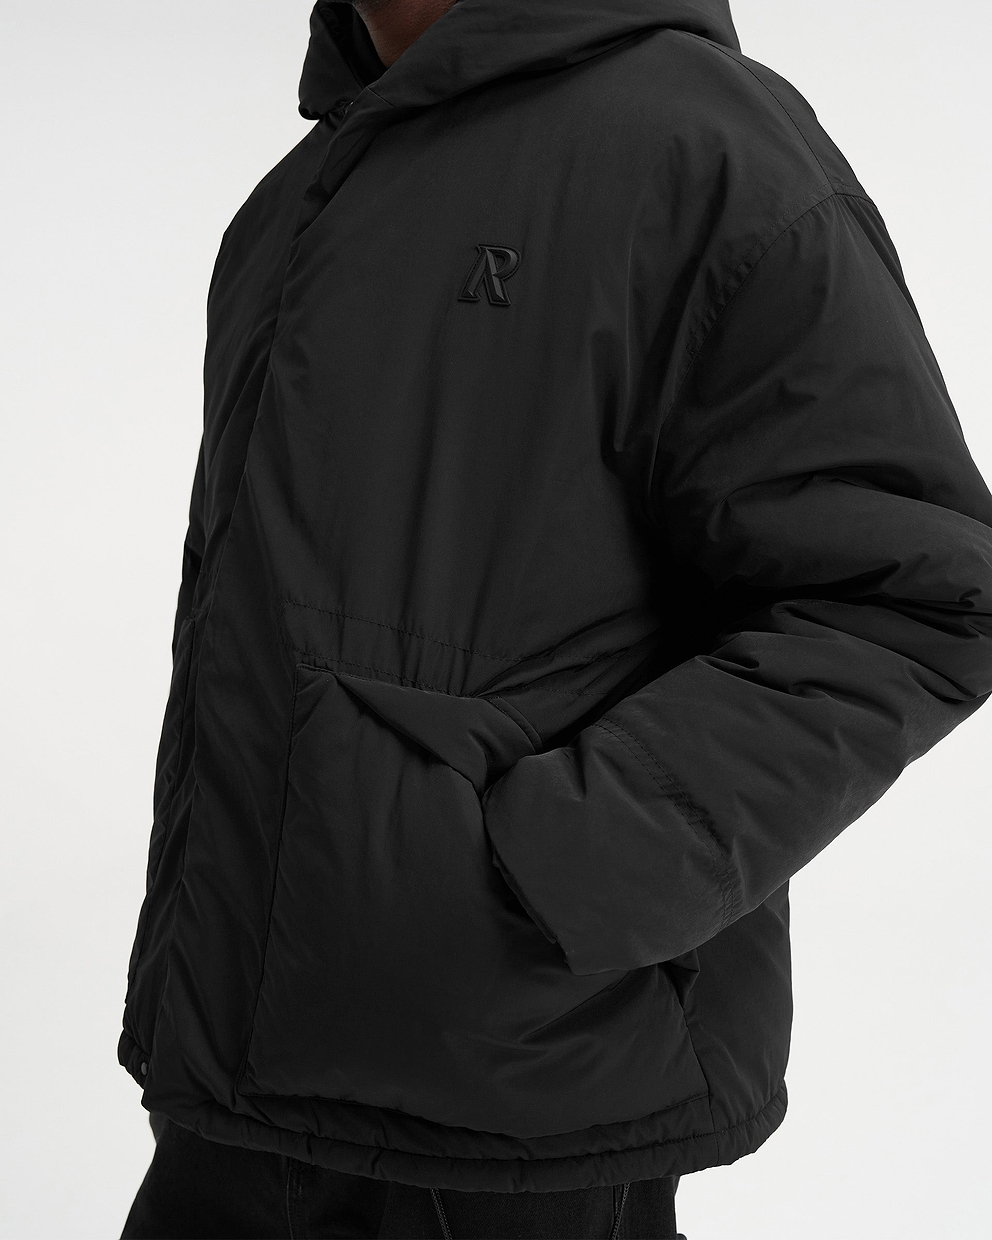 A-Cold-Wall* Black Classic Puffer Jacket A-Cold-Wall*